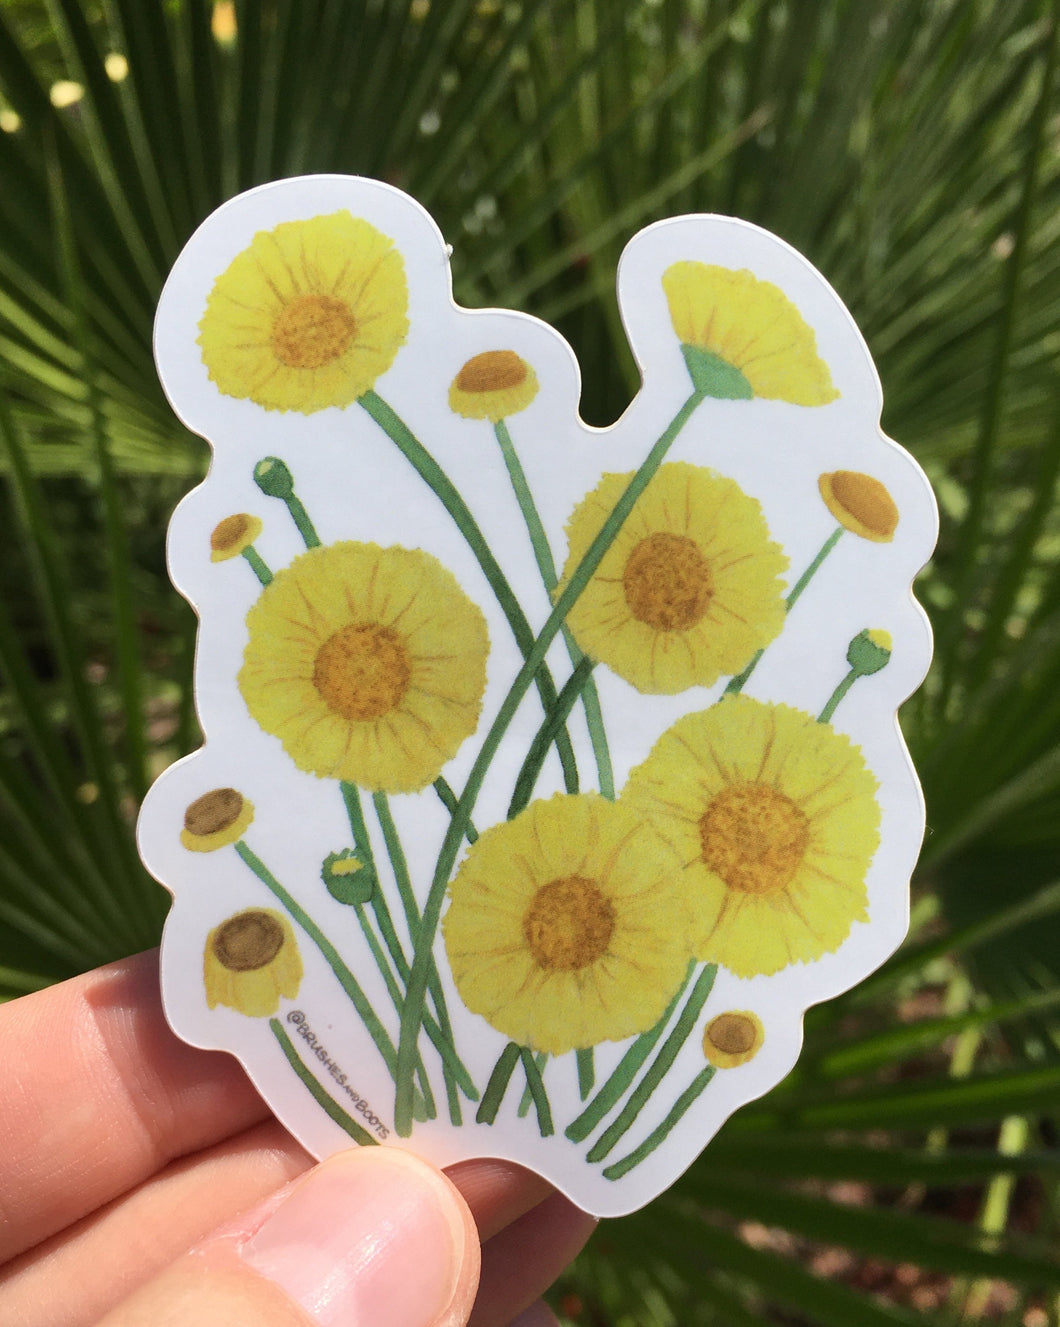 Vinyl sticker with desert marigold flowers in a watercolor design by Brushes and Boots